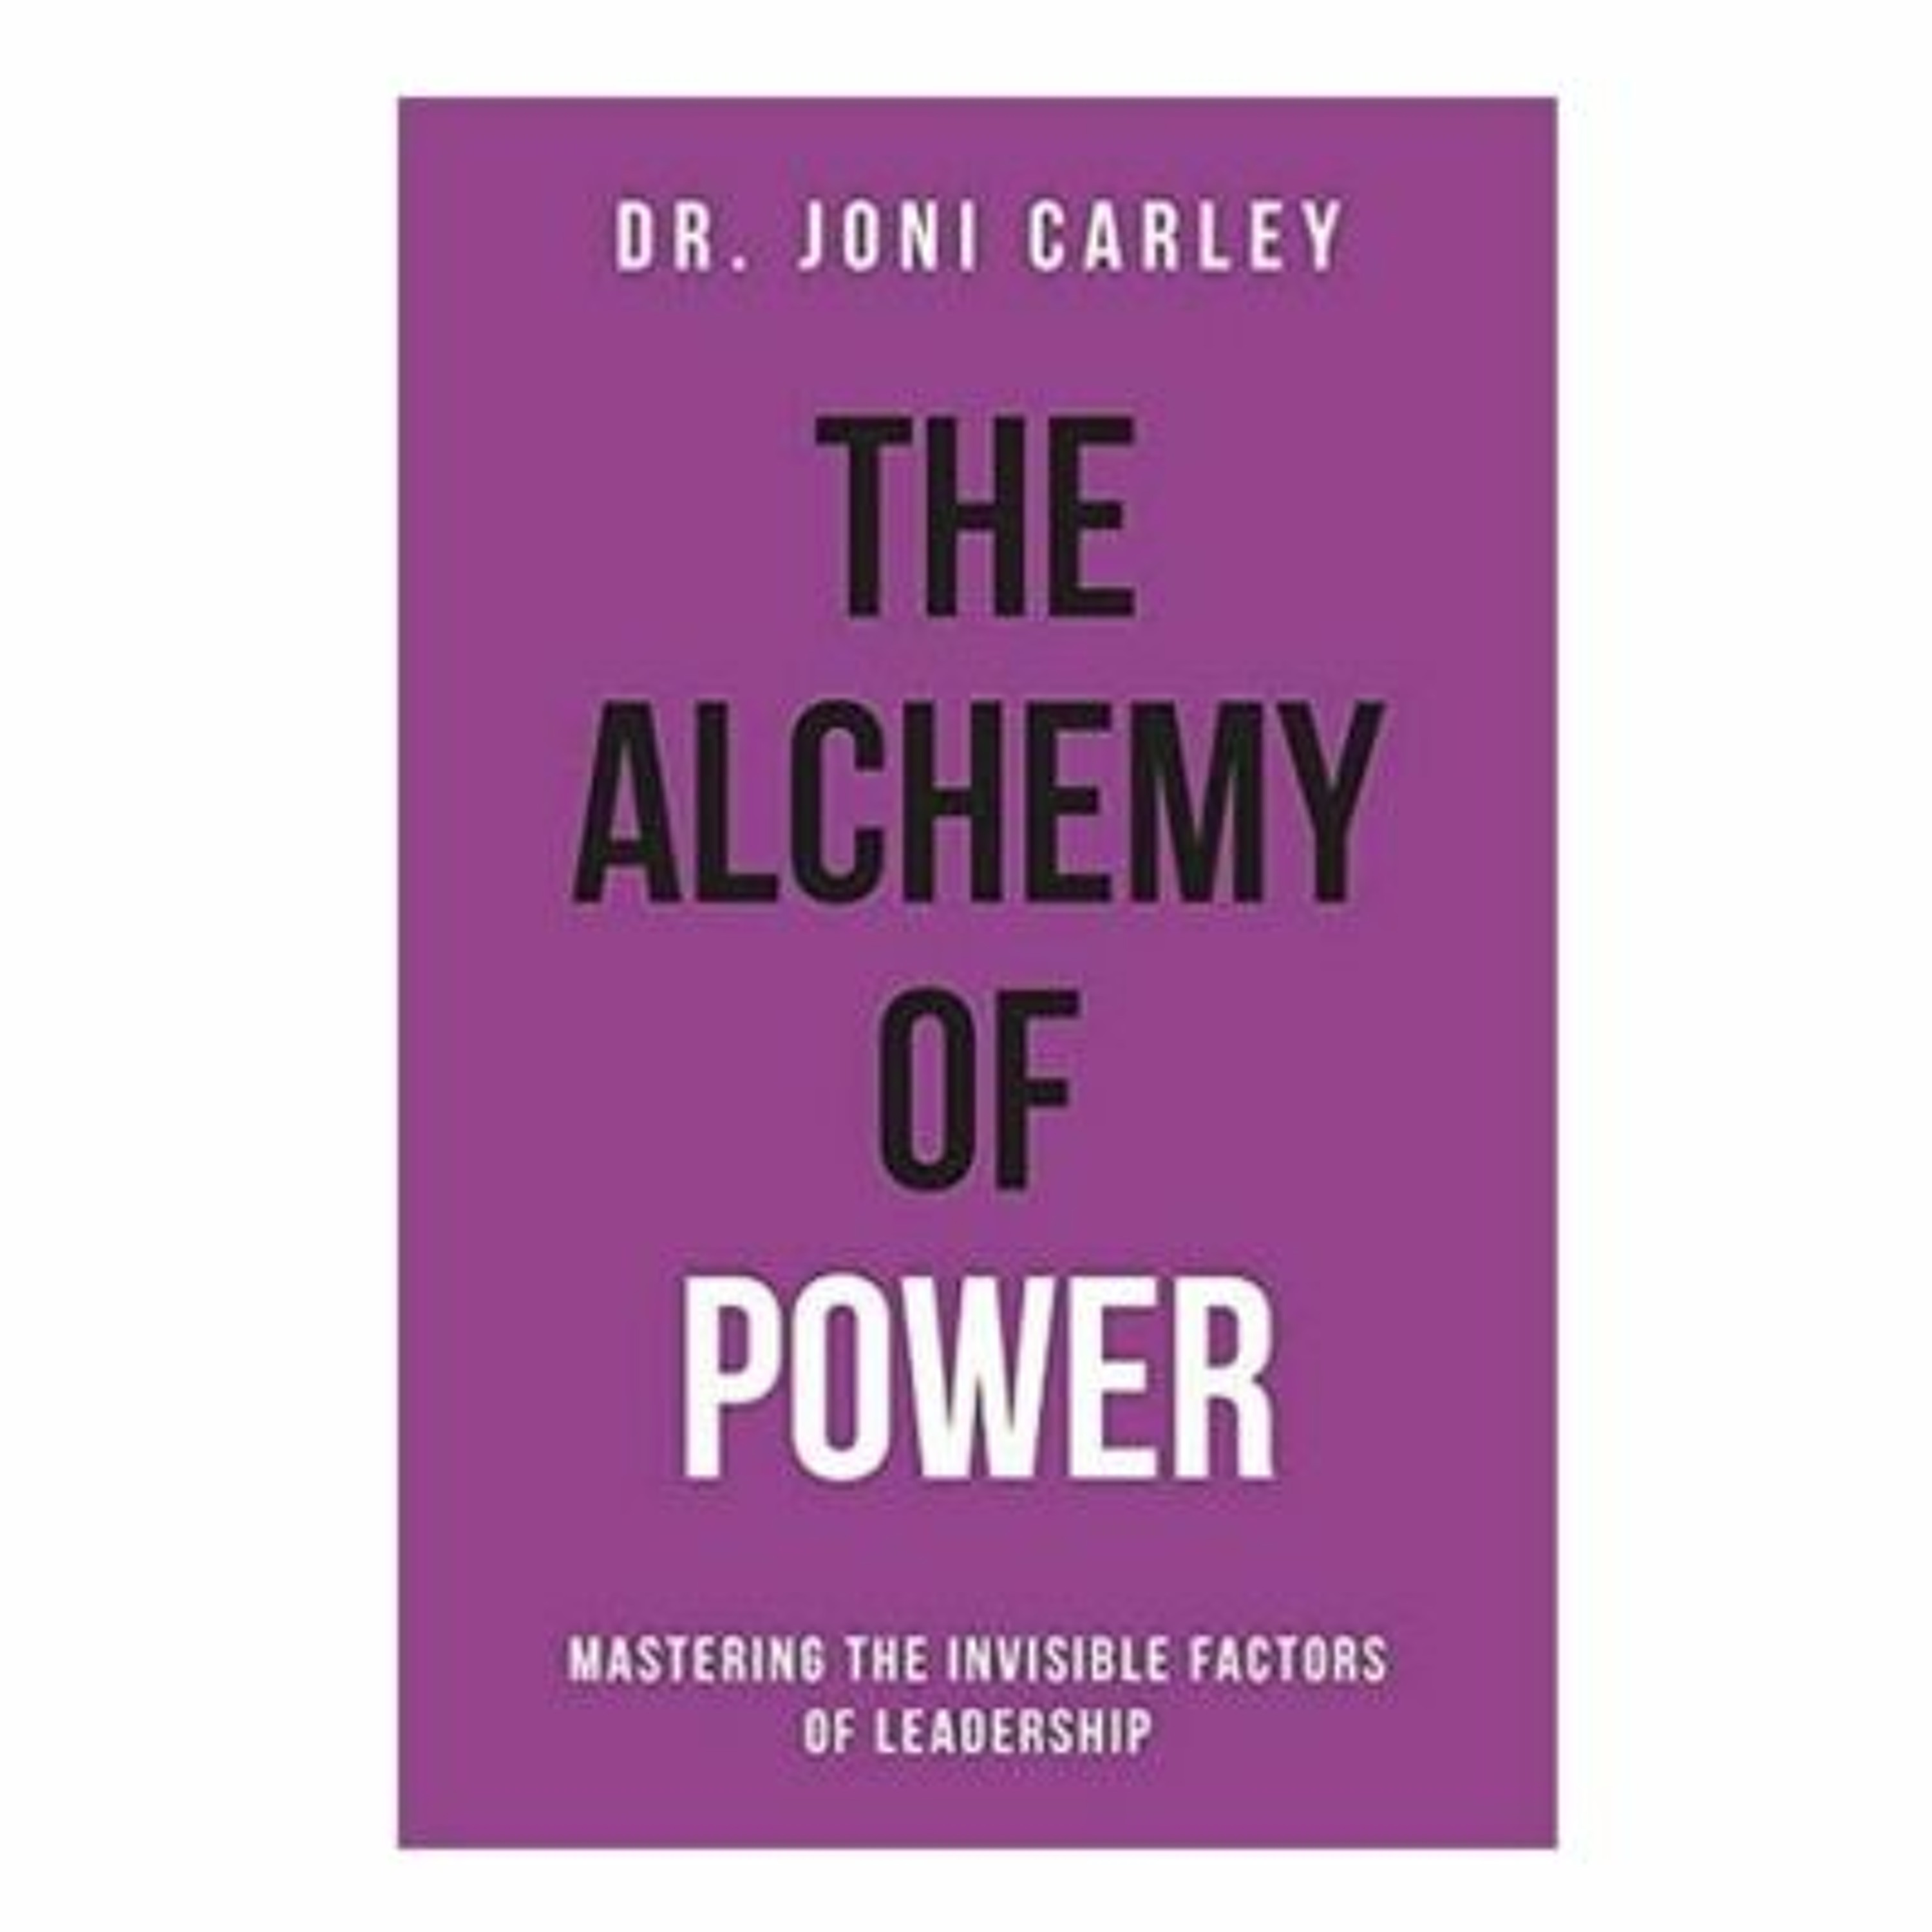 Podcast 1038: The Alchemy of Power with Dr. Joni Carley